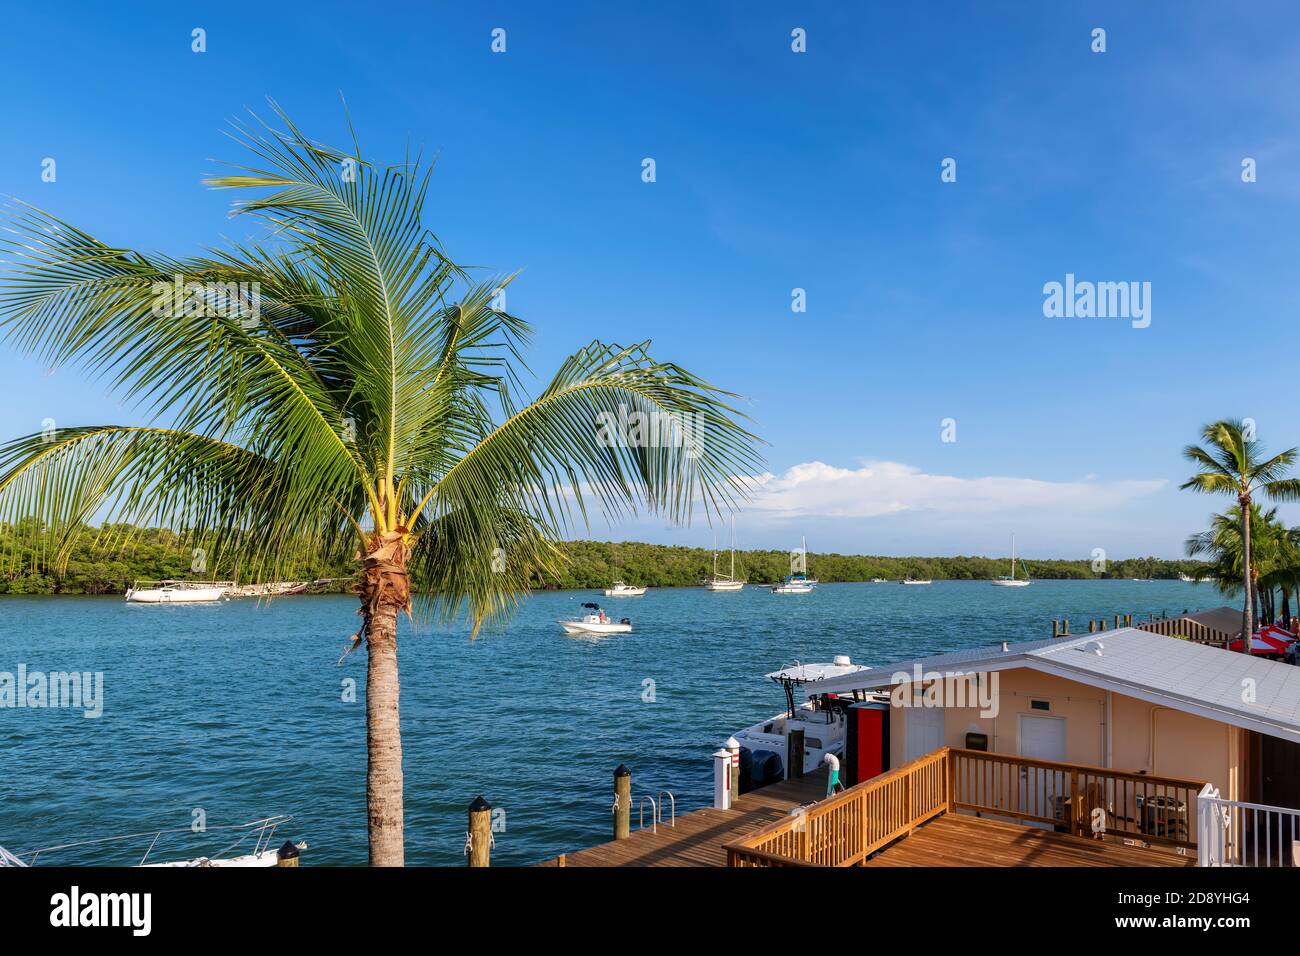 Palm tree over sea pier and sea boats on bay in Key West, Florida, USA Stock Photo